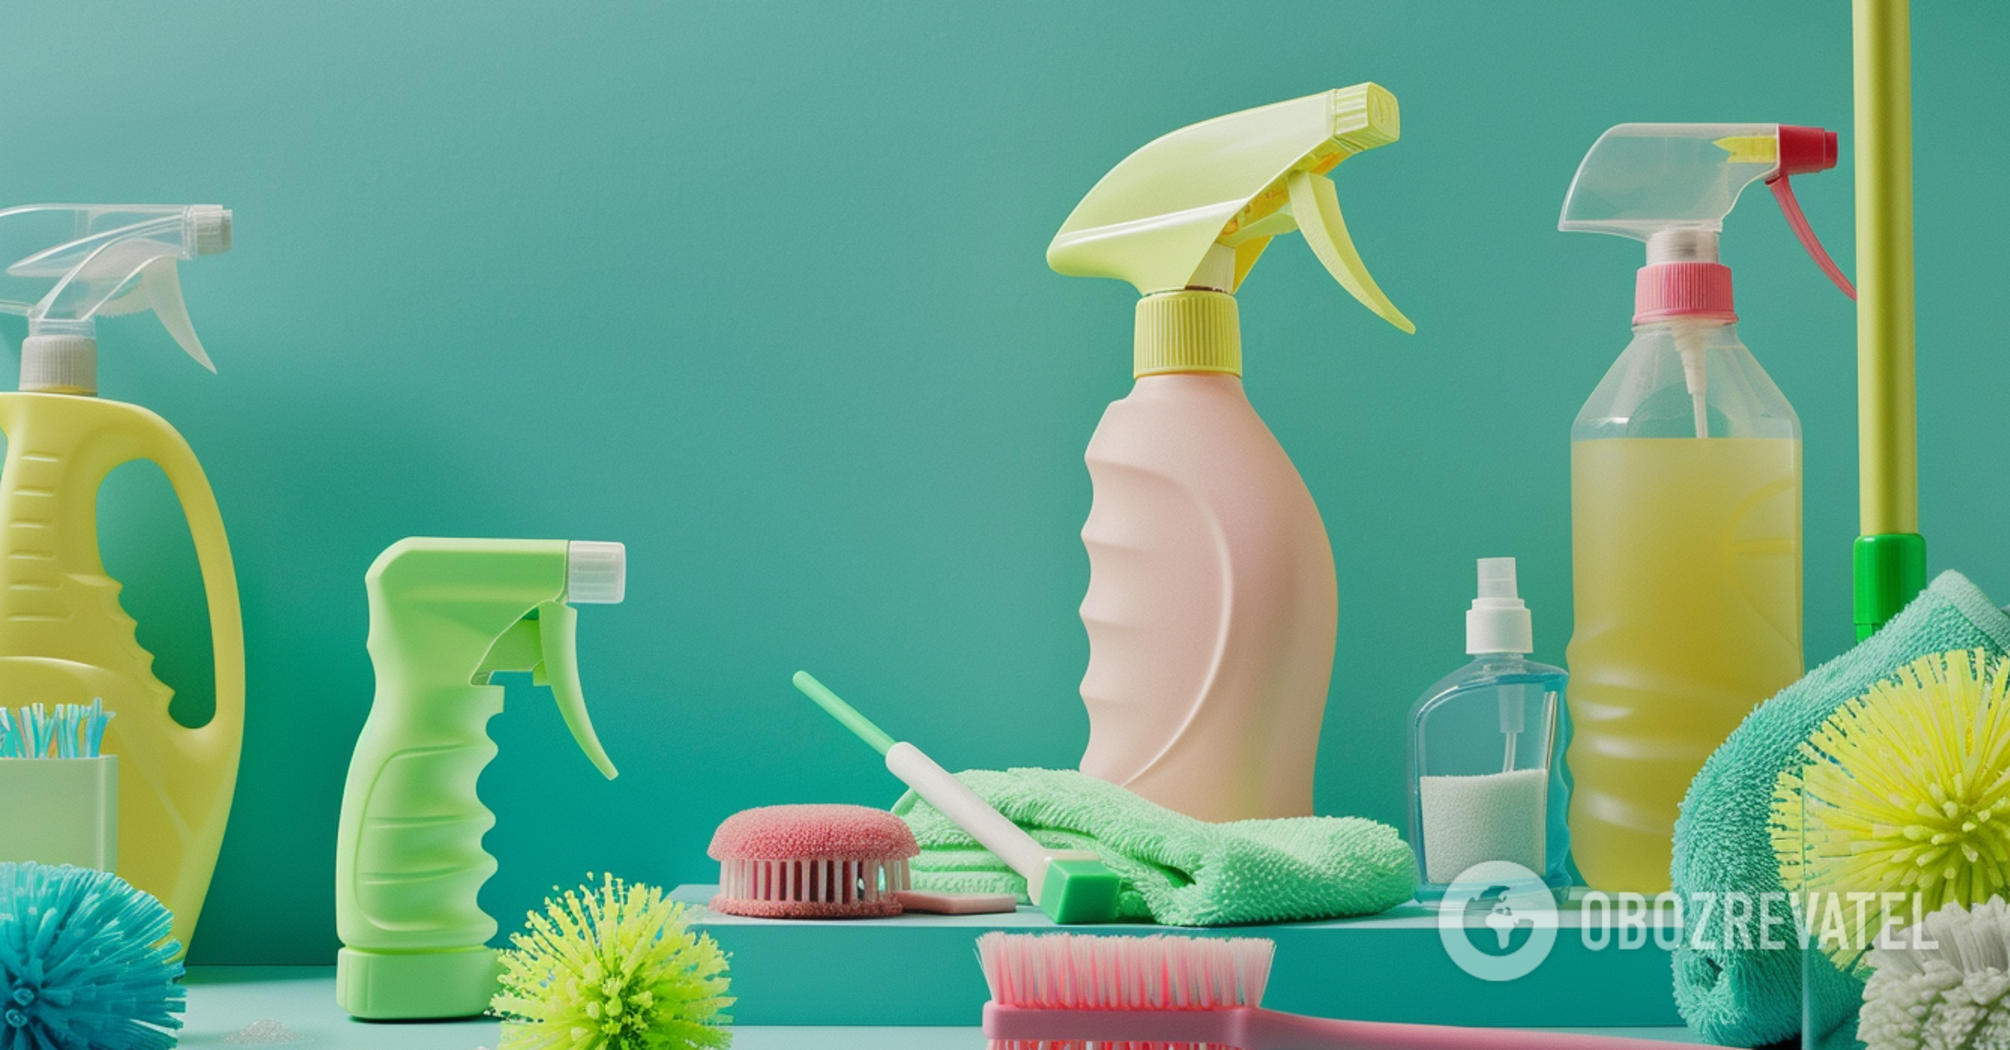 To keep your home perfectly clean: what is the minimum you should do every day